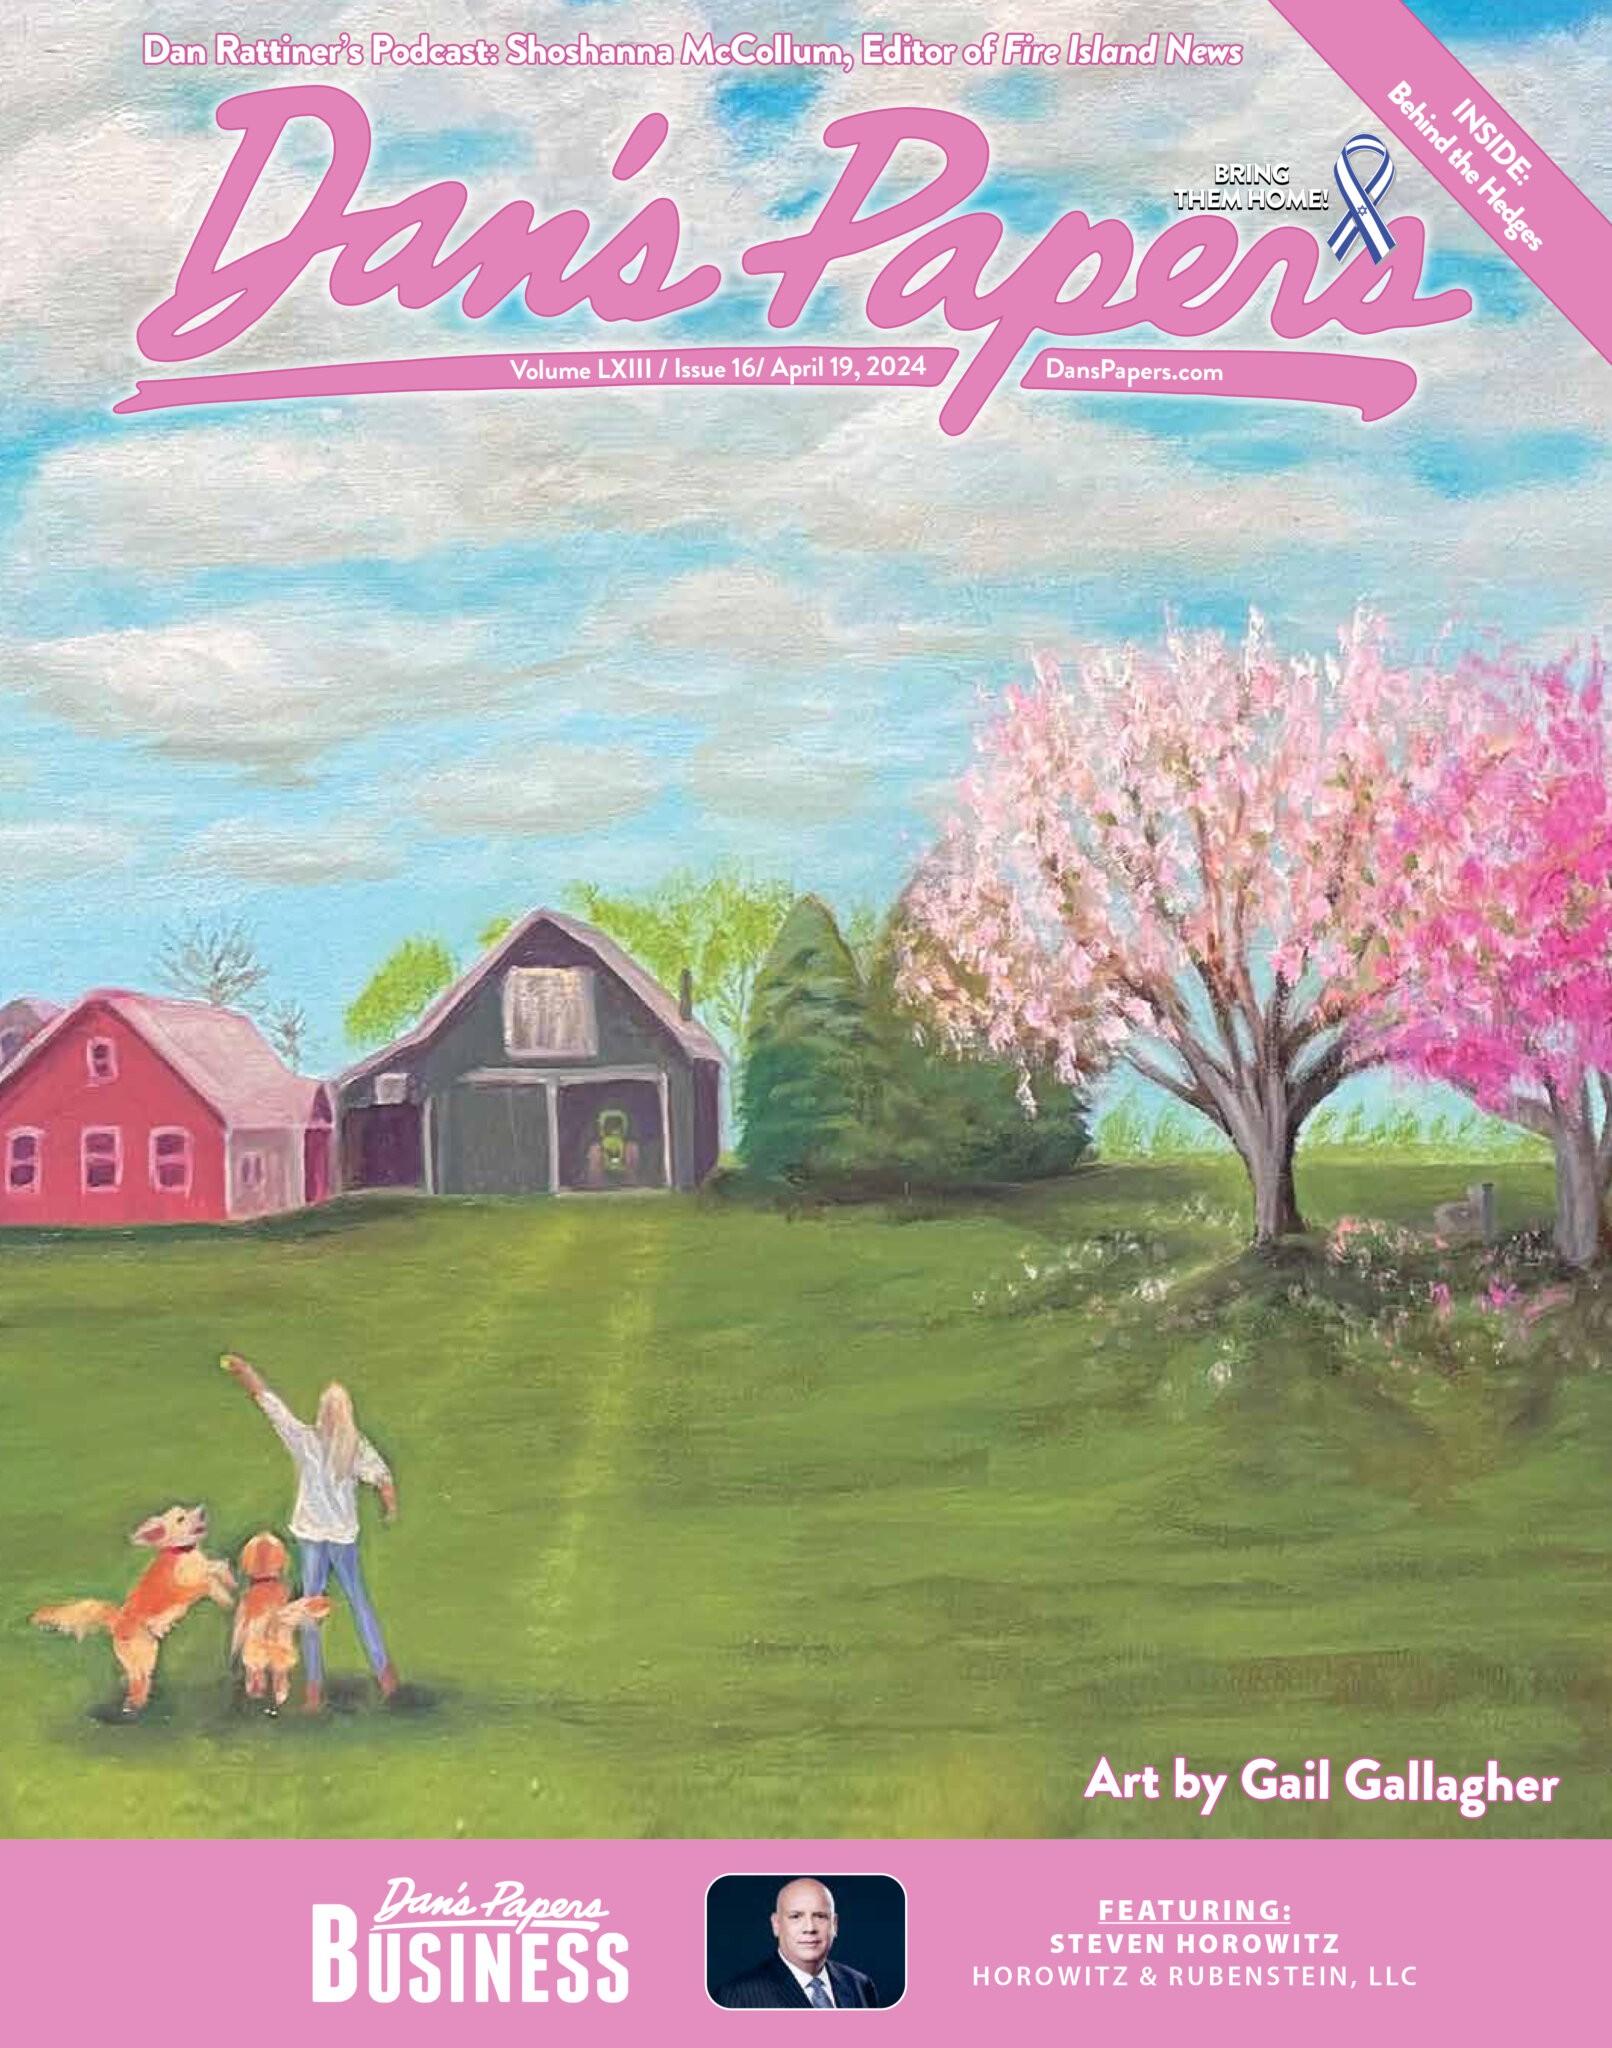 April 19, 2024 Dan's Papers cover art by Gail Gallagher